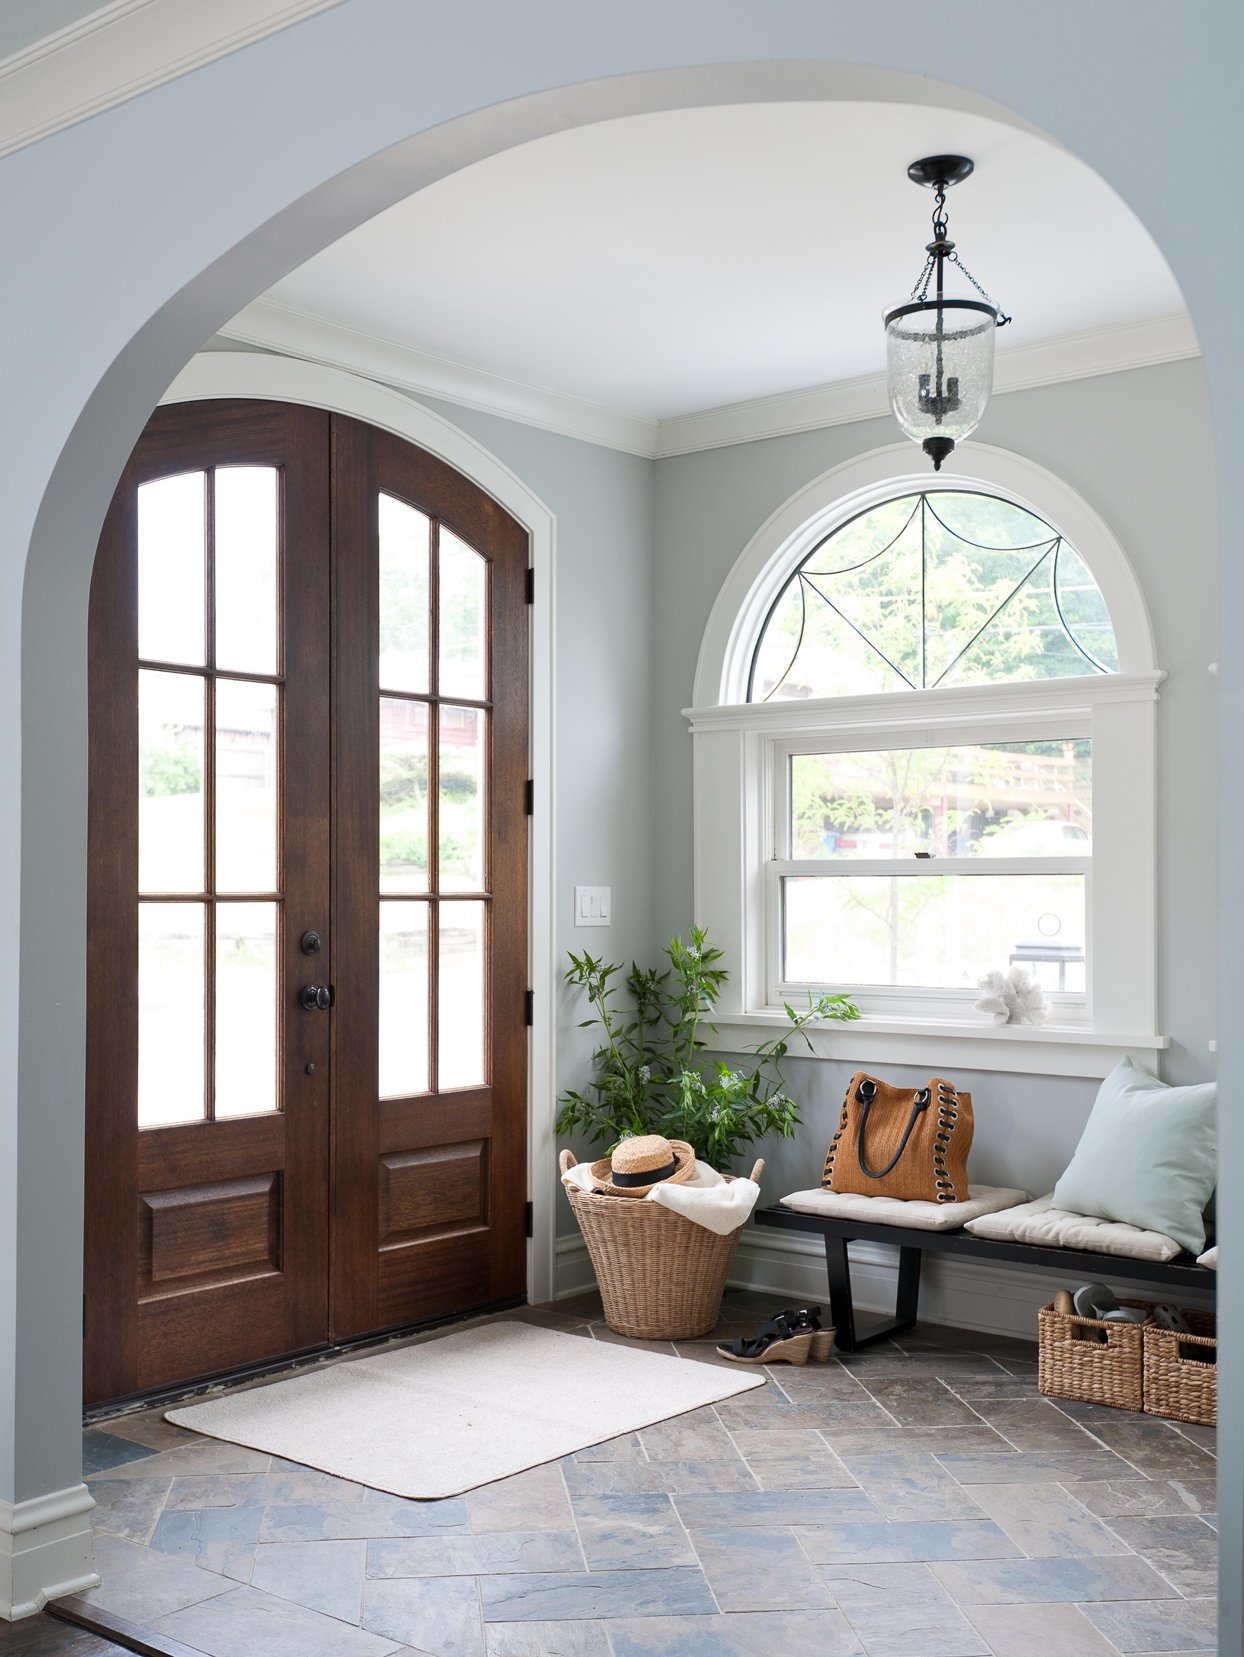 Arched PVC windows in the interior of the house